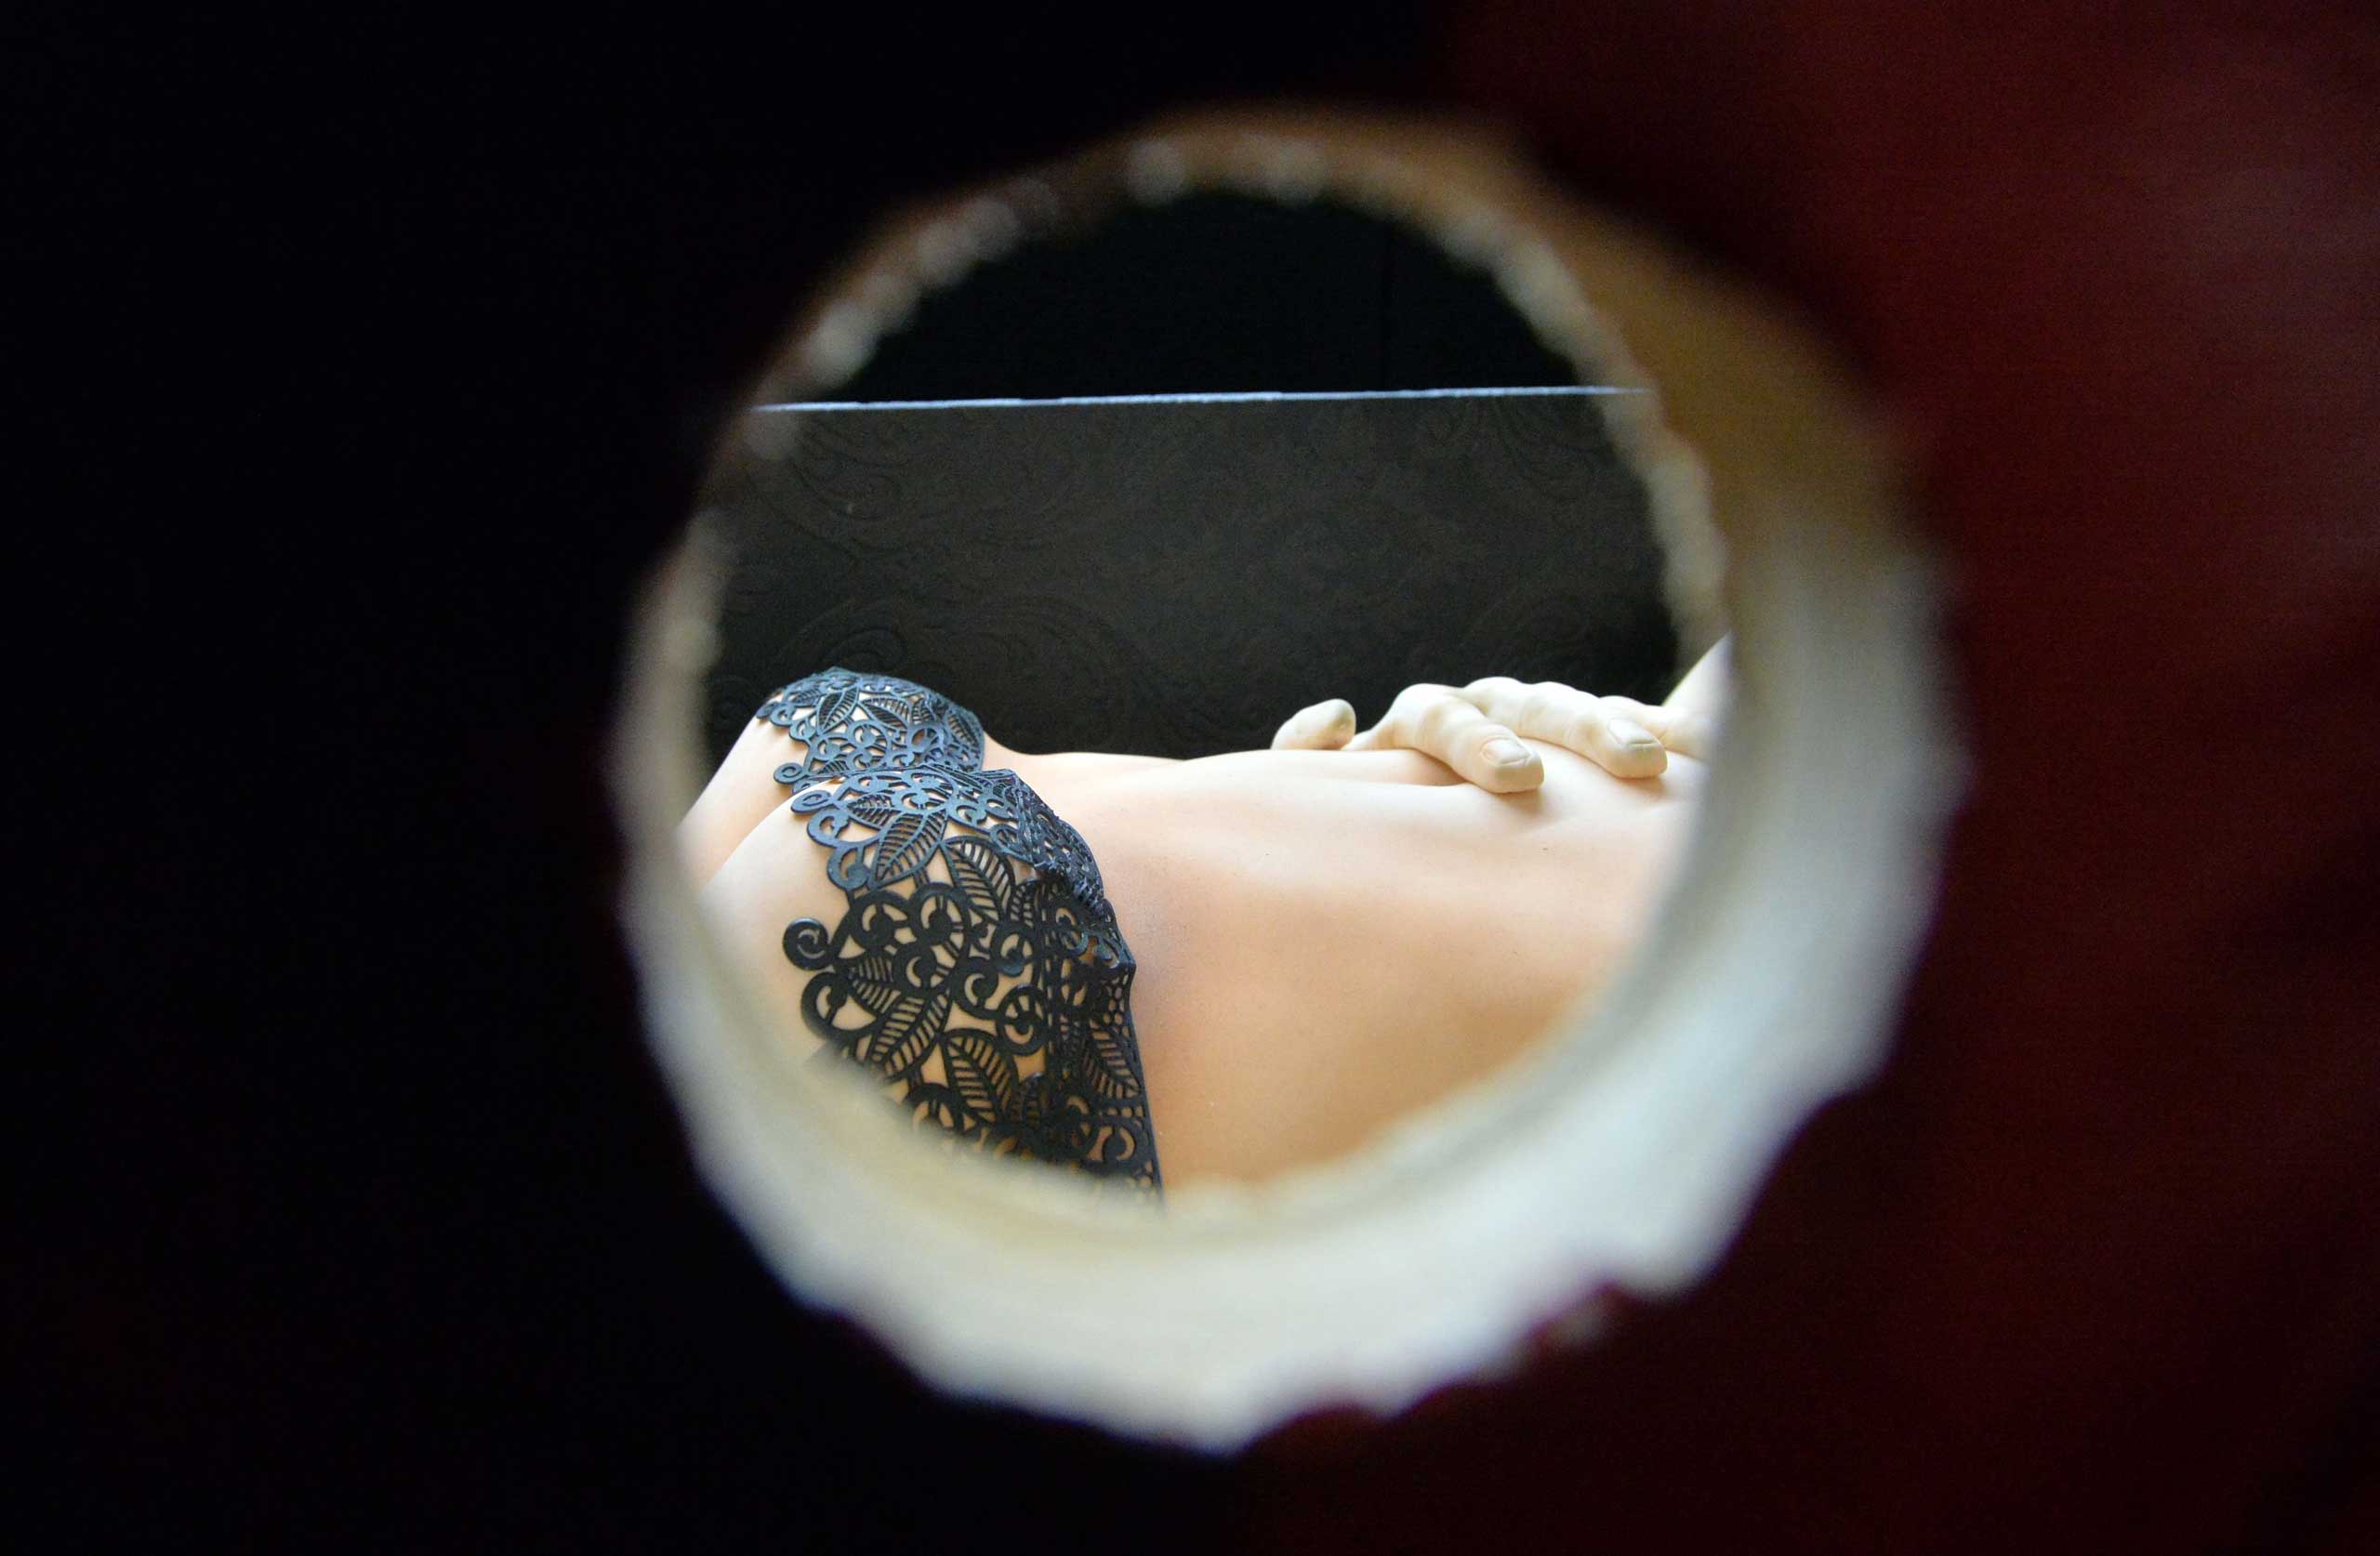 Feb. 8, 2015. A cake model of a women is seen through a peephole in an exhibit depicting the book and film, Fifty Shades of Grey, during the final day of the Cake International show in Manchester, northwest England.